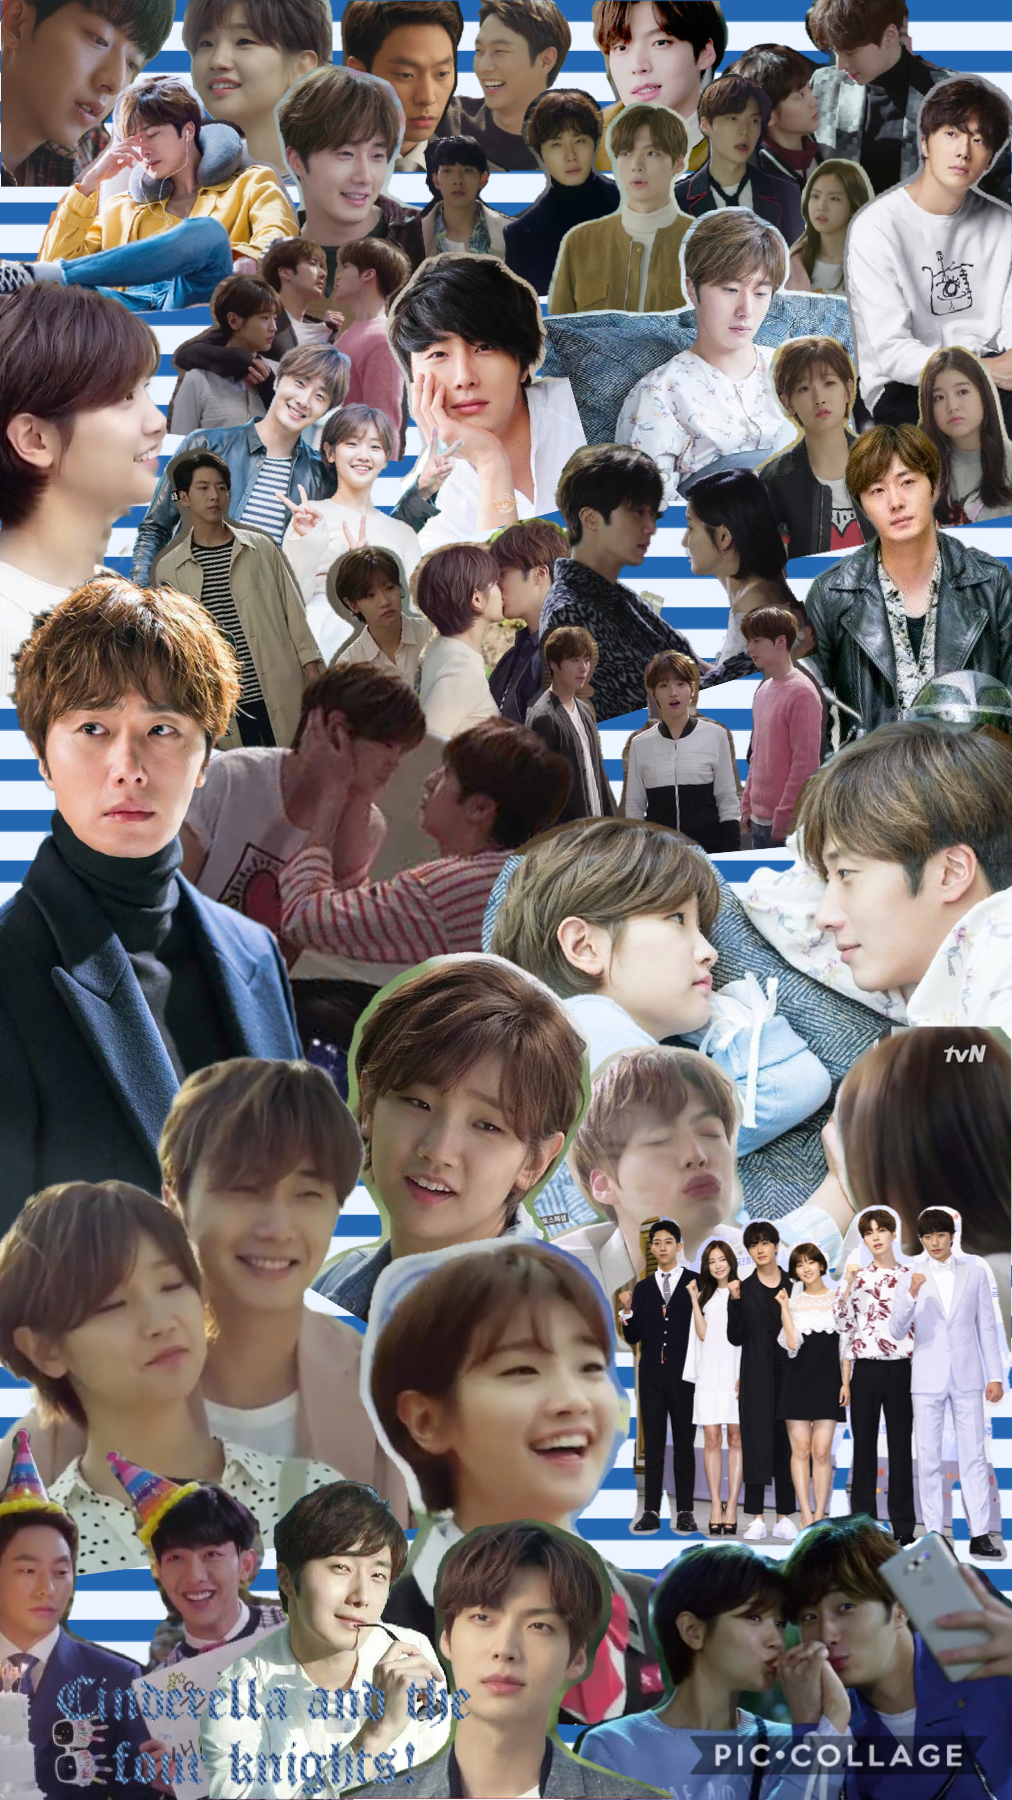 This was my first K-Drama, hope you like it ;)